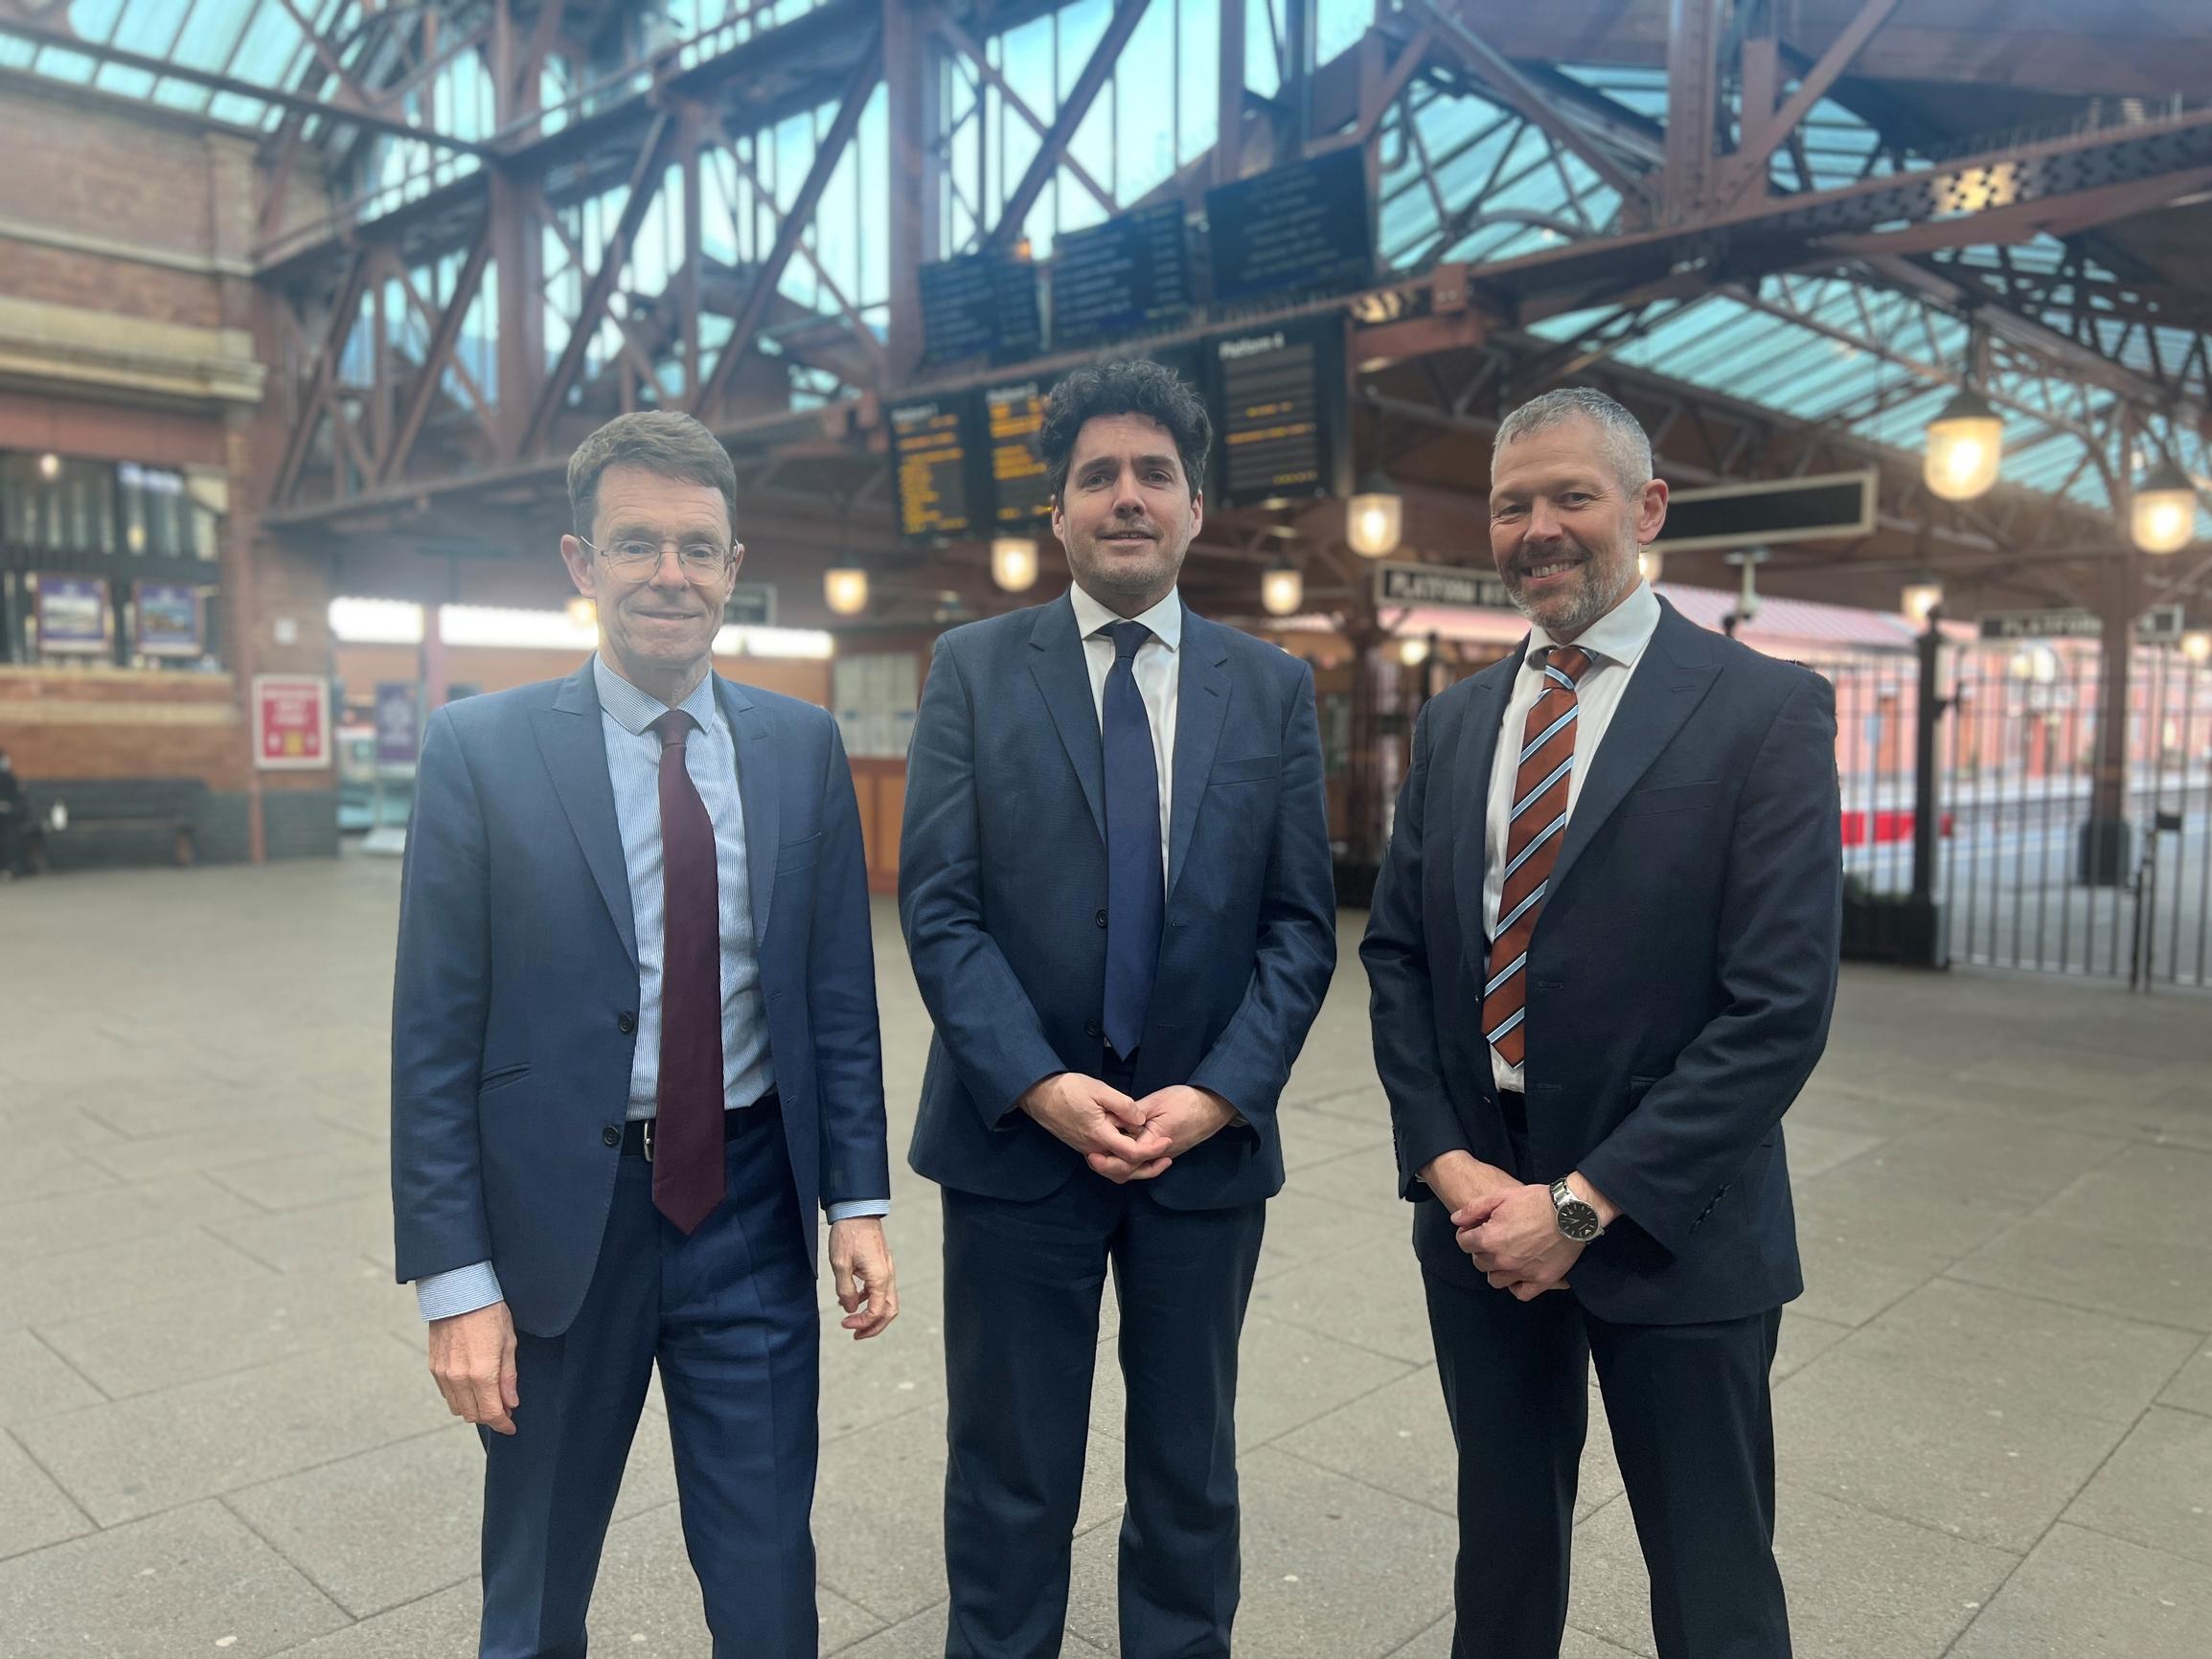 From left: Andy Street, Huw Merriman and Malcolm Holmes at Moor Street Station